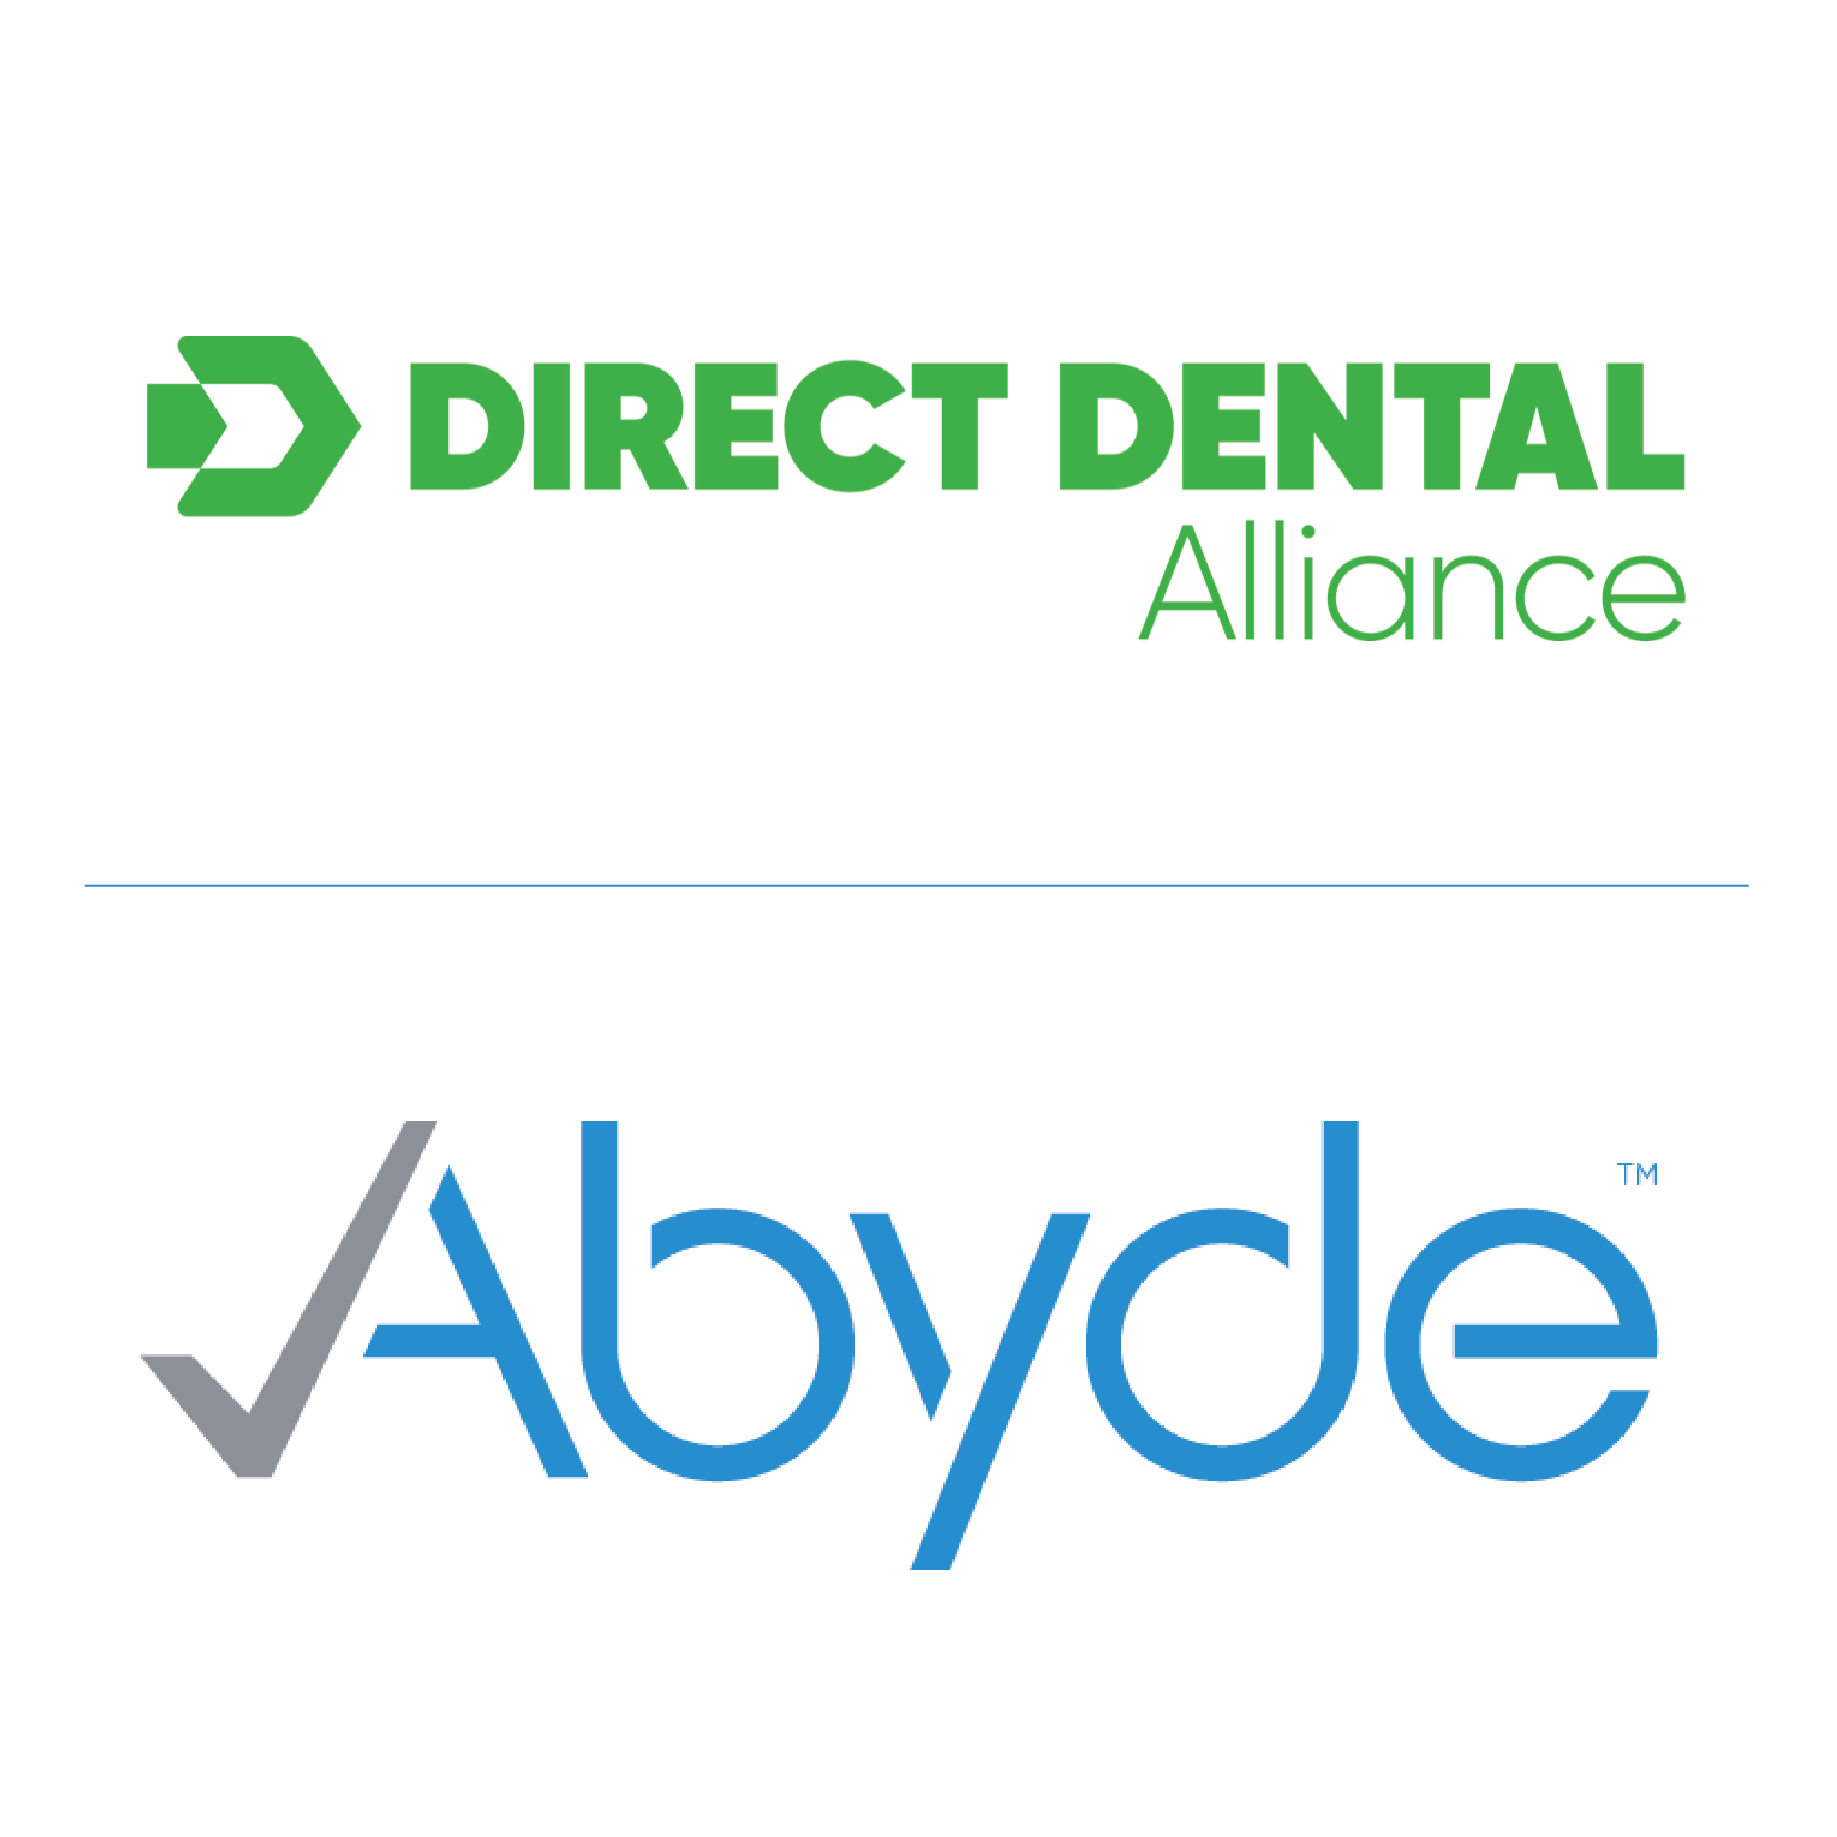 Abyde partners with Direct Dental Alliance to deliver comprehensive HIPAA compliance solutions